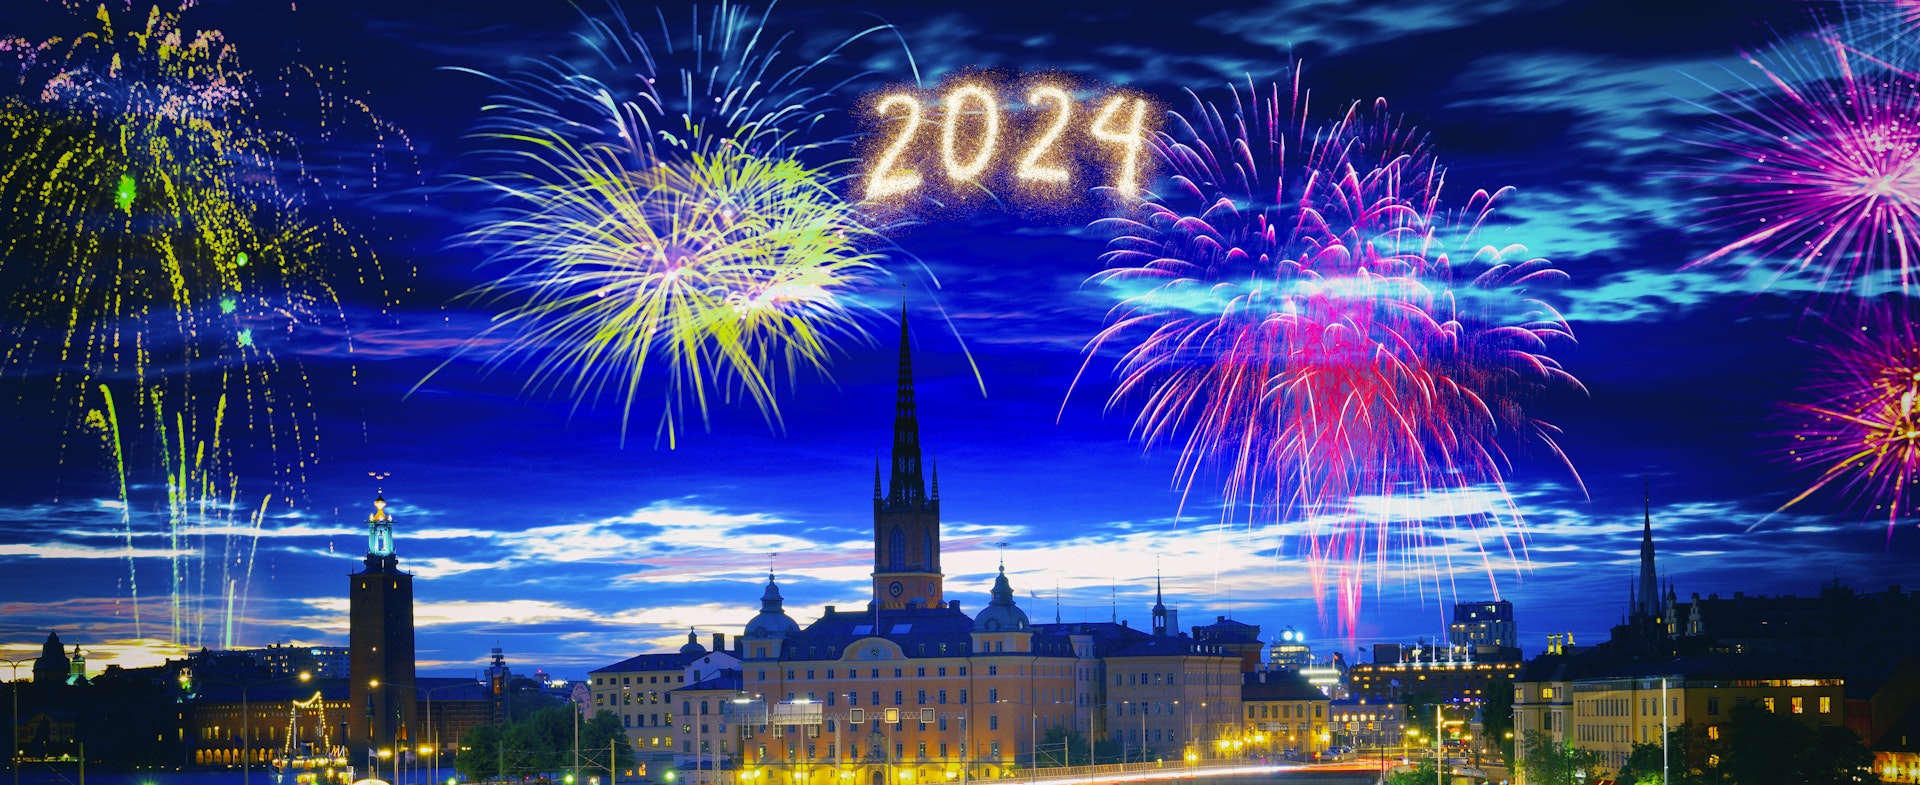 The Stockholm skyline at night, illuminated by fireworks with "2024" depicted.